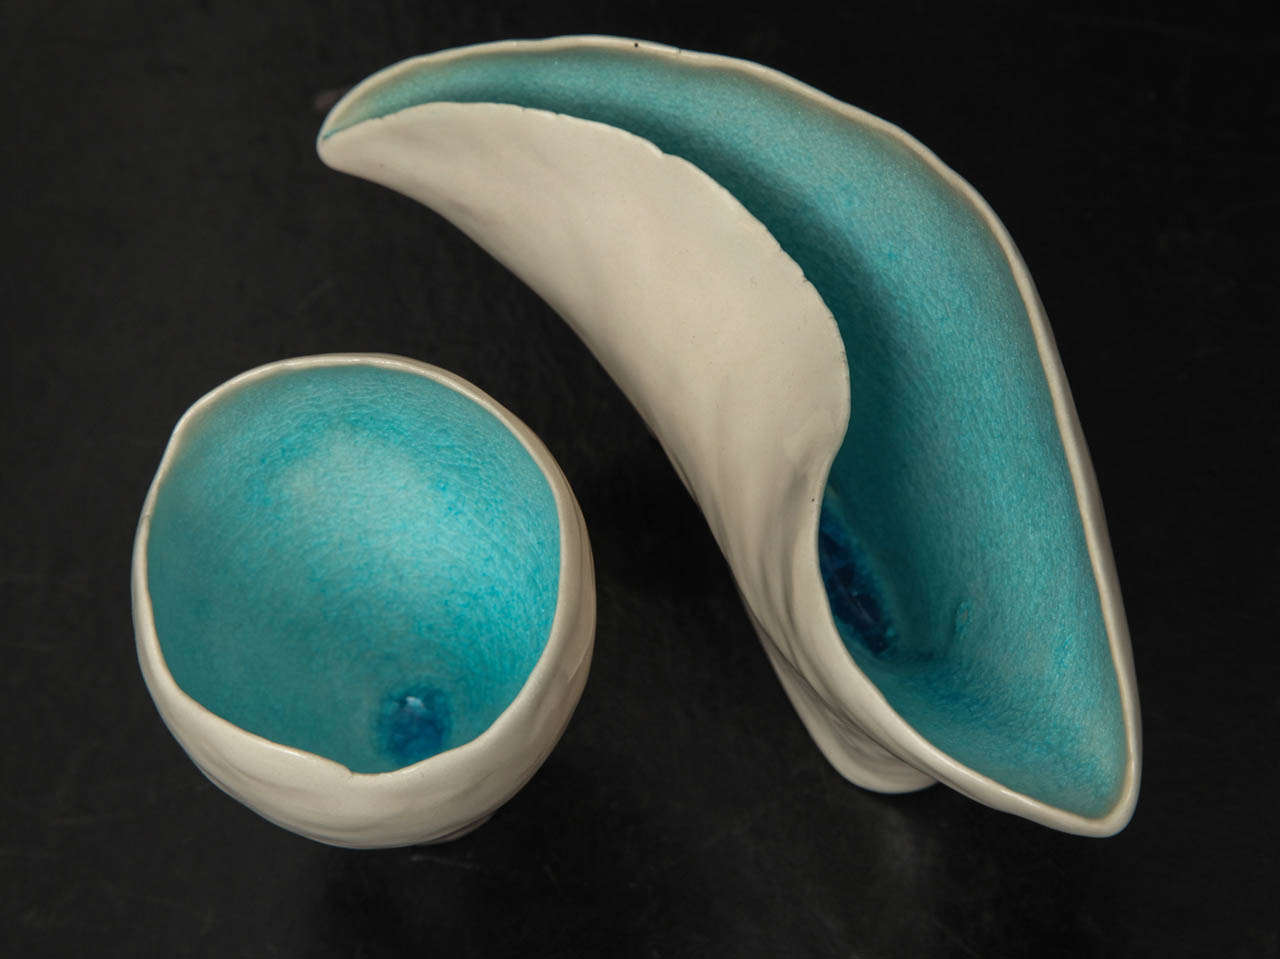 Tall Wisps, Aqua, Duo
Pair of hand-built porcelain vessels with aqua glaze interior. 
Made by Stephanie Chiacos expressly for Liz O'Brien.

Smallest: 3 3/4”H x 3”Dia  
Largest: 4 1/8”H x 7”W x 2 1/2”D